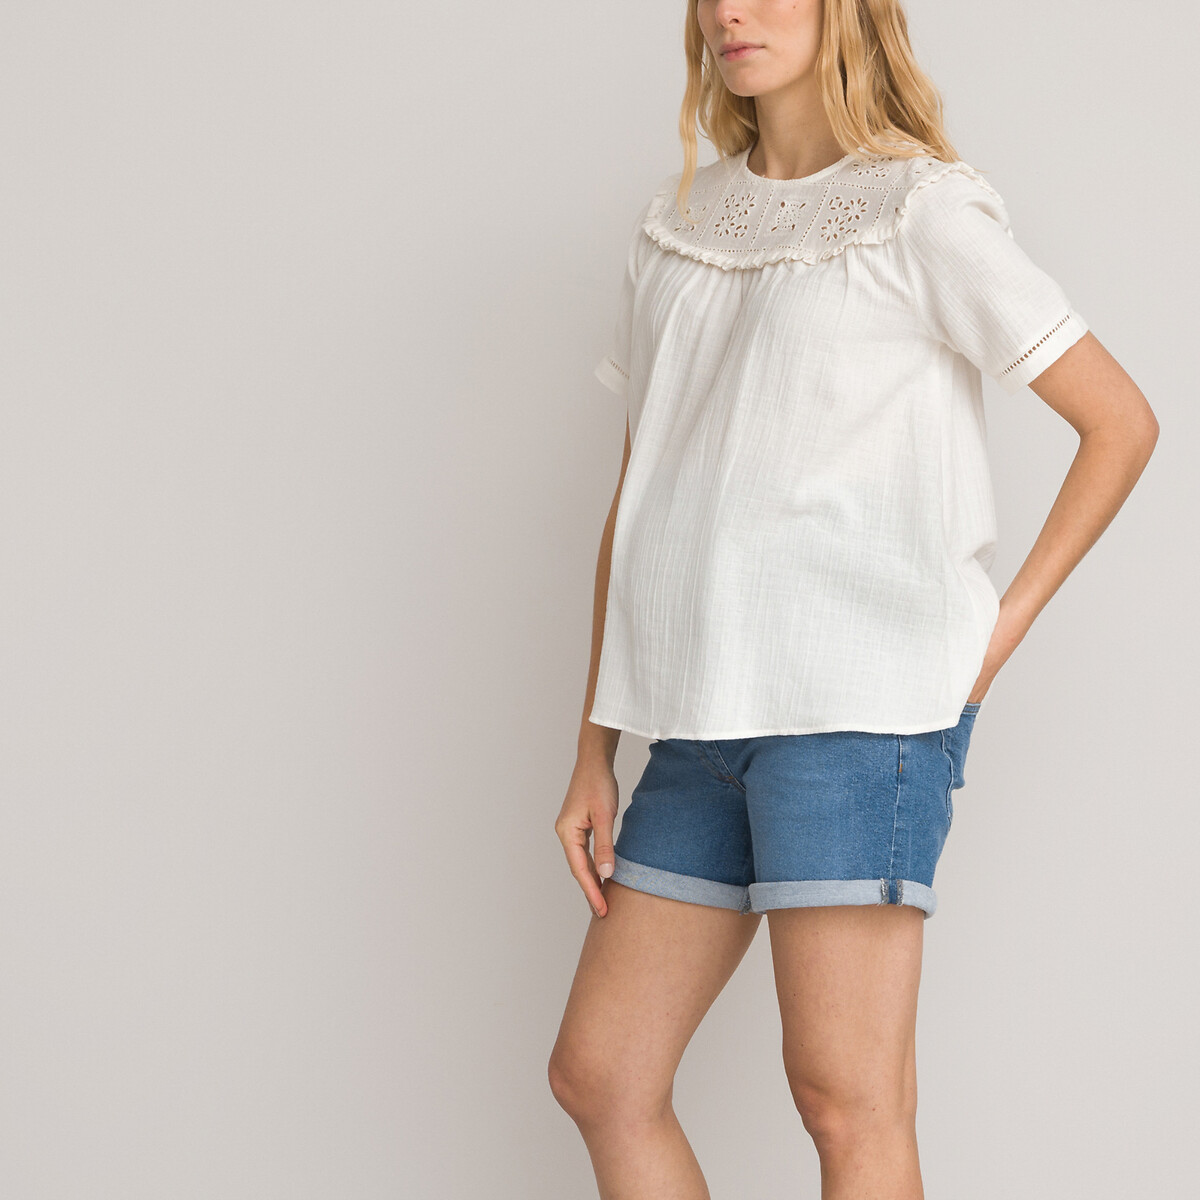 Cotton Maternity Blouse with Embroidered Ruffled Bib Front